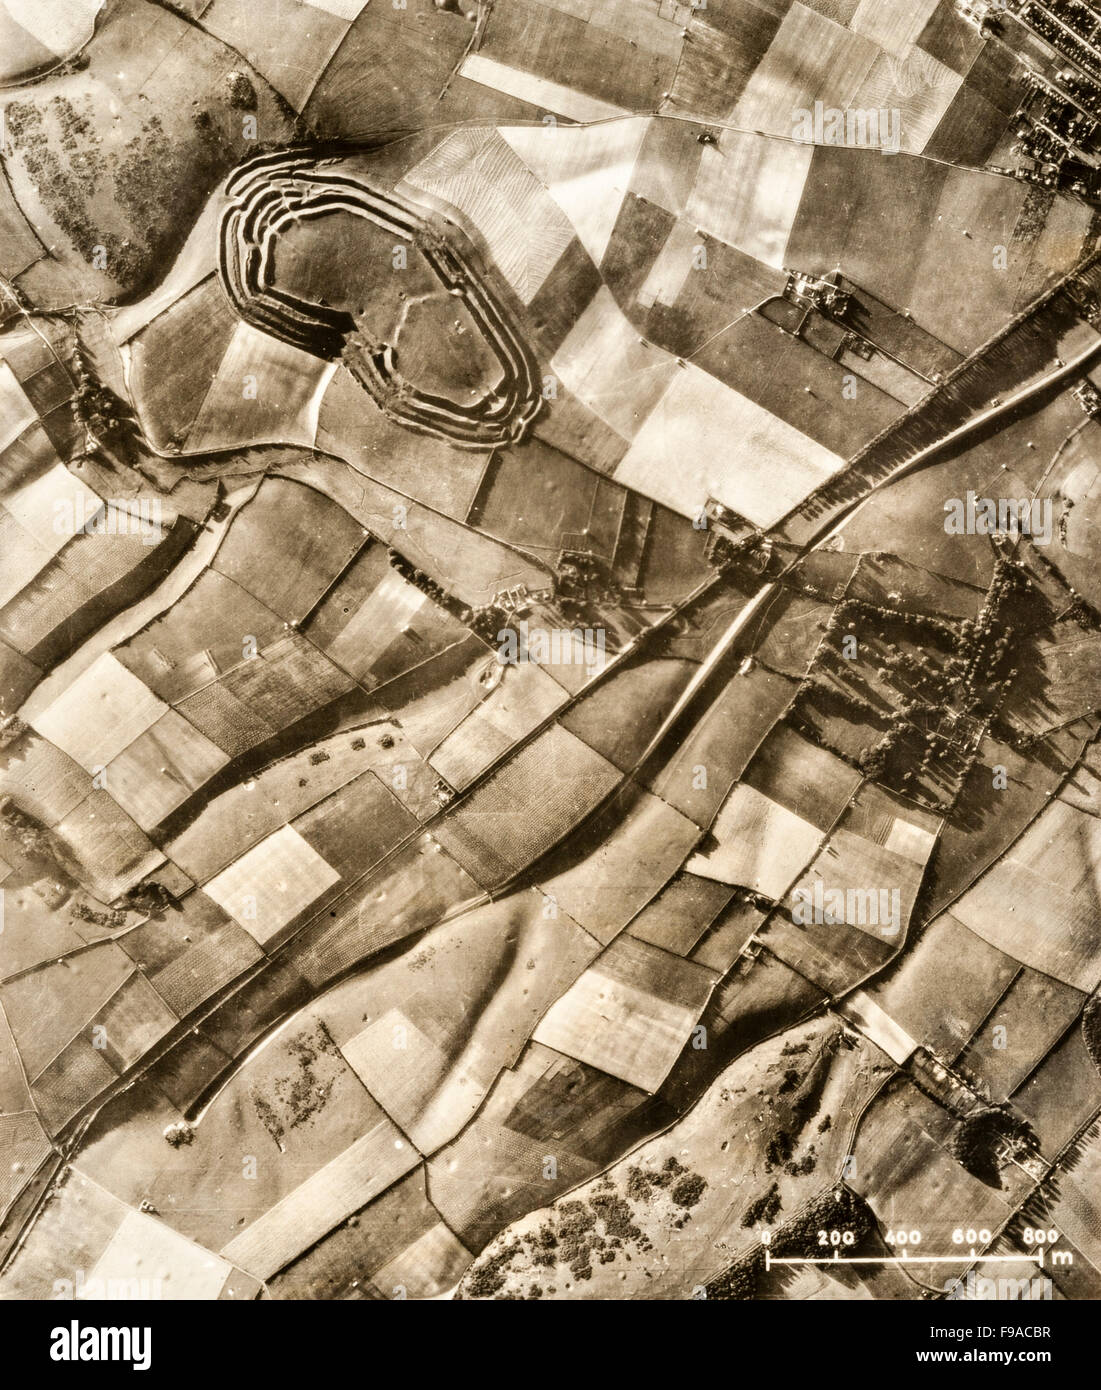 Maiden Castle, near Dorchester, Dorset, UK. A prewar aerial photograph of this Iron Age hill fort, taken during the 1930s. It is the largest hill fort in Britain. Construction began about 600 BC, with a major expansion around 450 BC Stock Photo